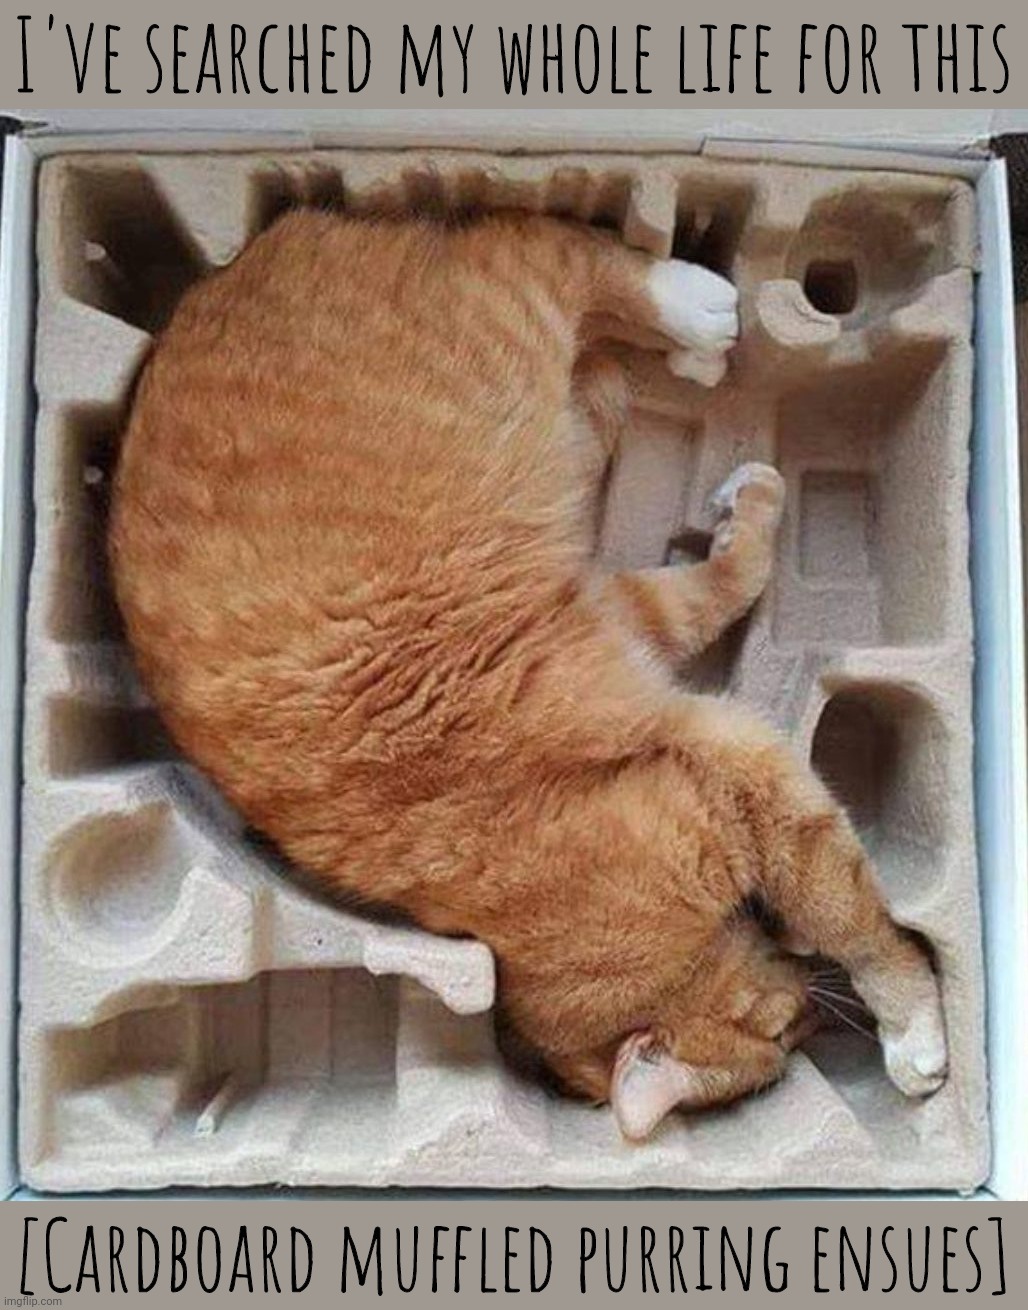 If the box fits,,, | I've searched my whole life for this; [Cardboard muffled purring ensues] | image tagged in cat,inner box form fitting,schrodinger's cat,schrodinger's cat exposed,don't worry kitty is still alive,don't try this at home | made w/ Imgflip meme maker